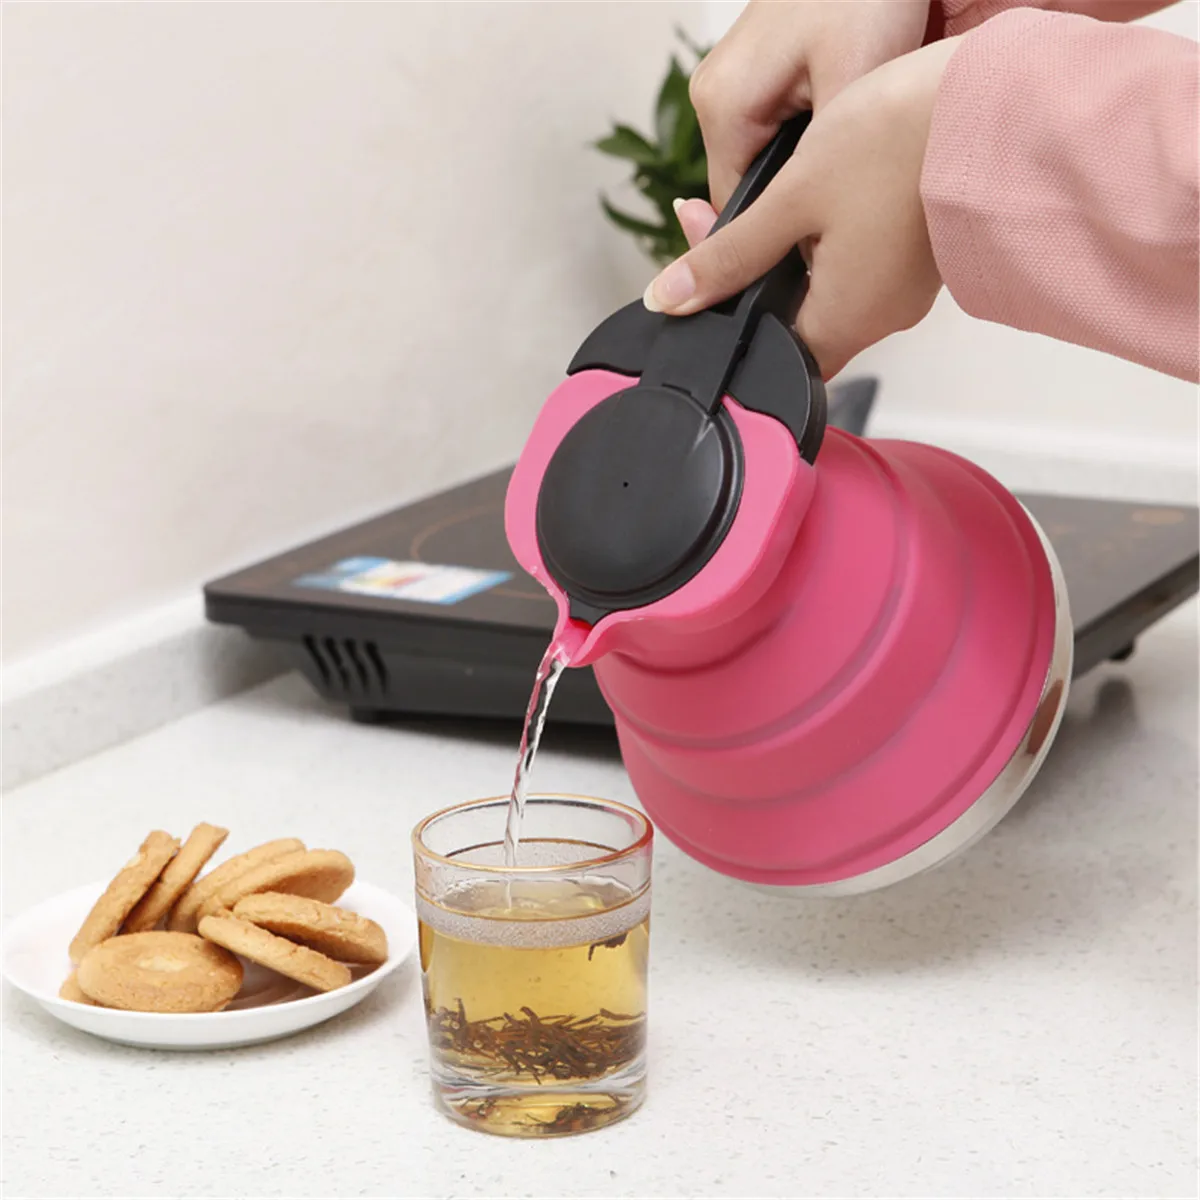 

New Portable Stainless Steel Silicone Collapsible Folding Water Kettle Outdoor Camping Travelling Hiking 1.5L Folding Tea Kettle